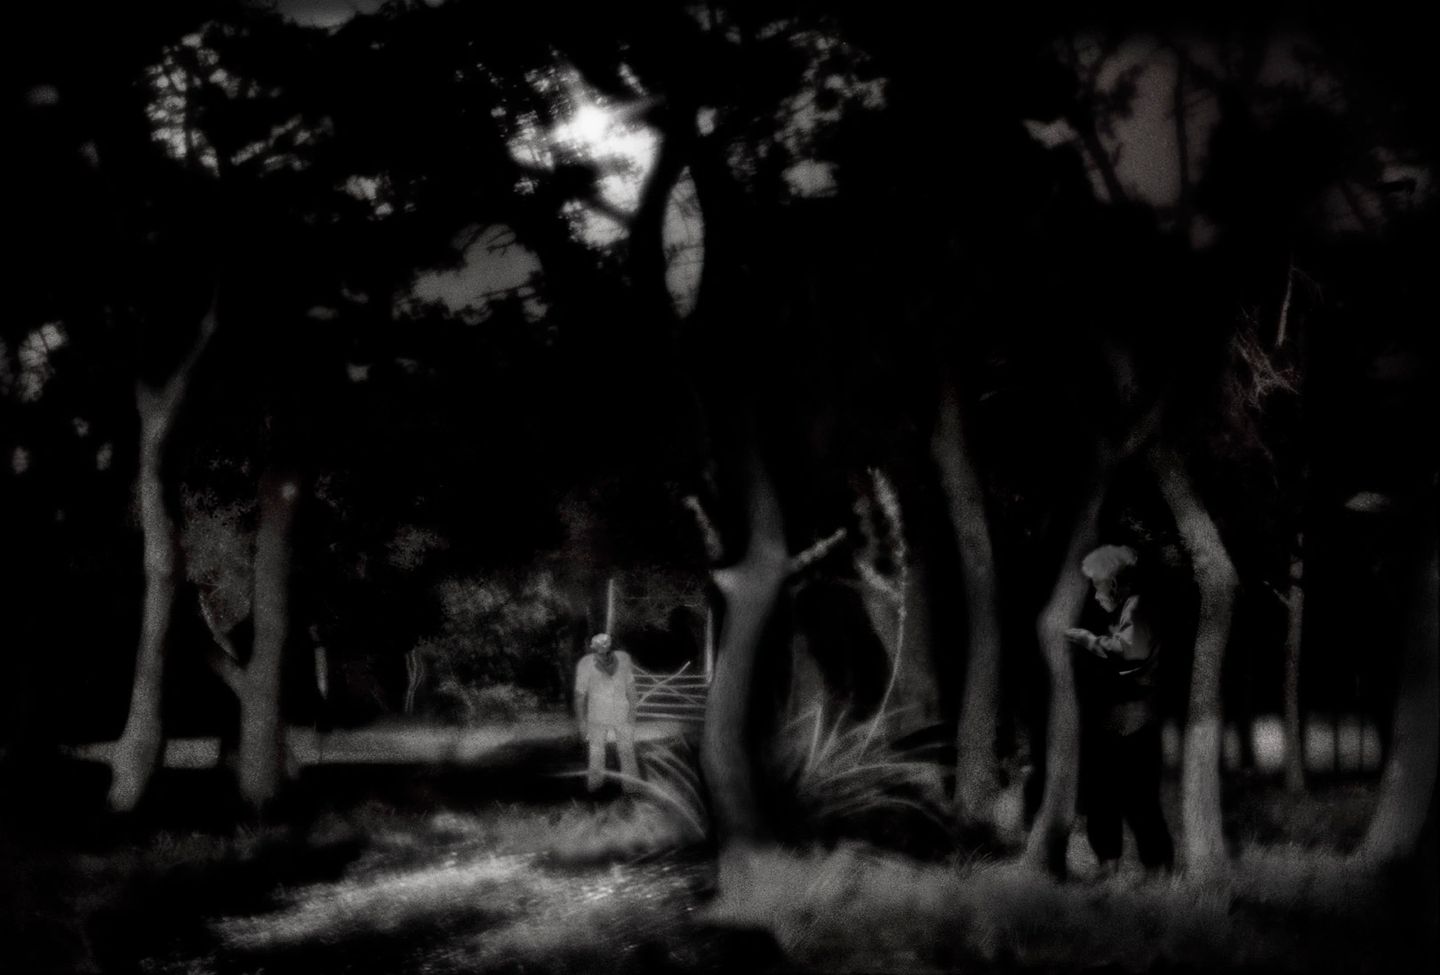 A black and white photo of trees with people in the background.